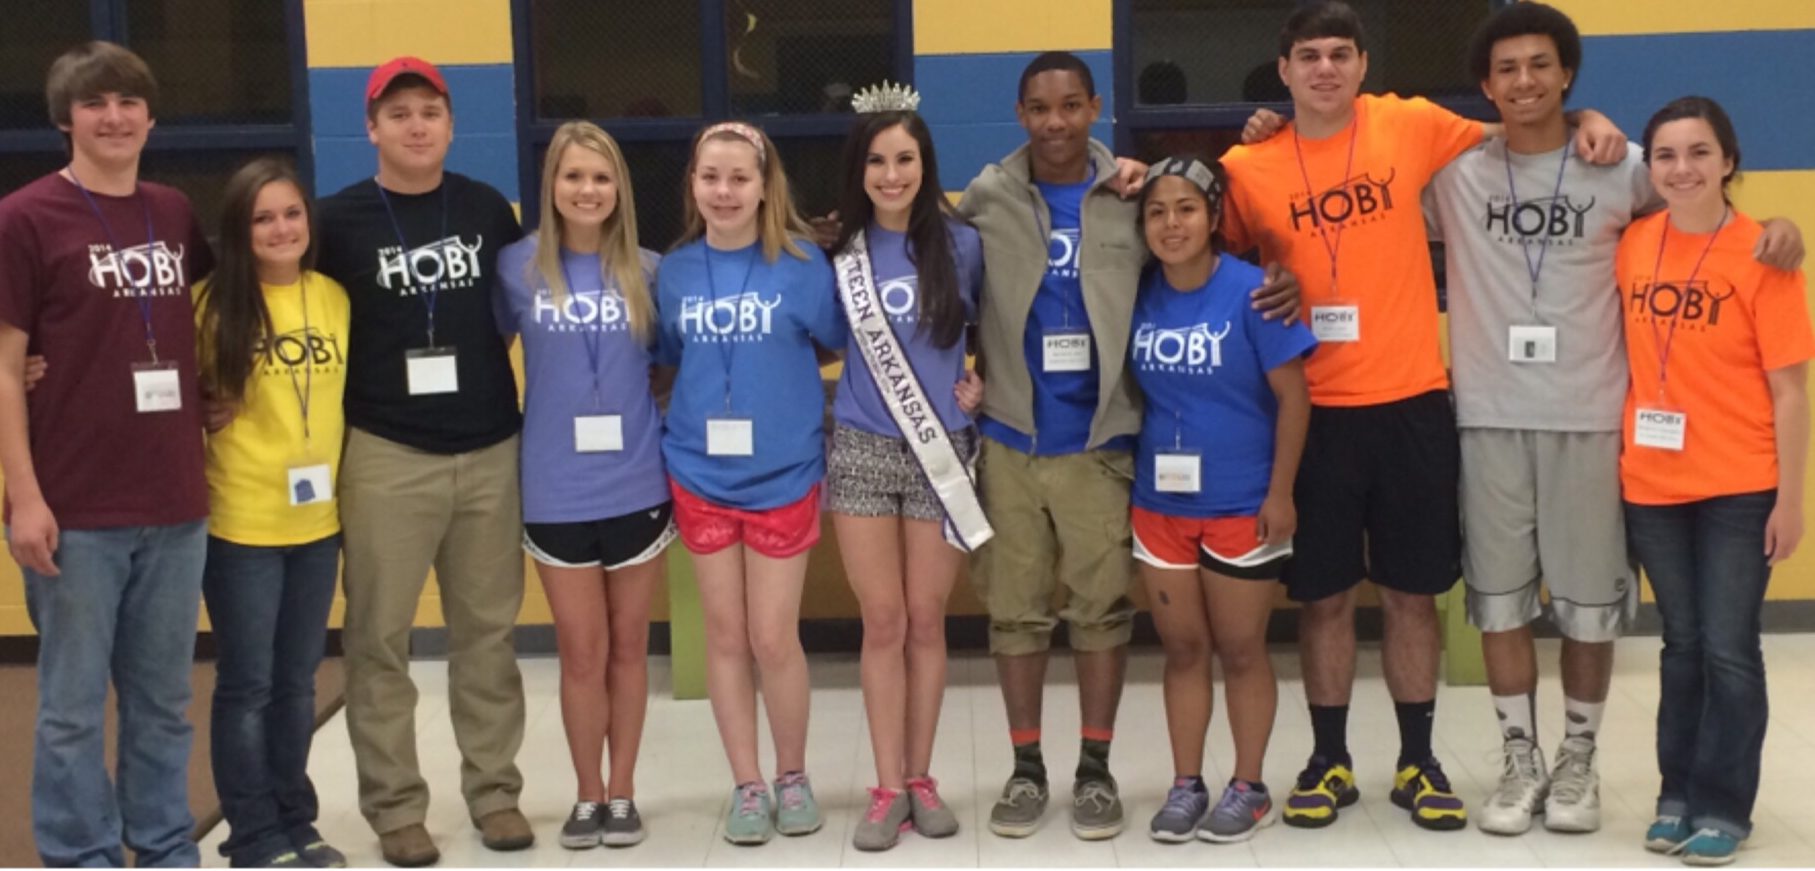 HOBY 2014